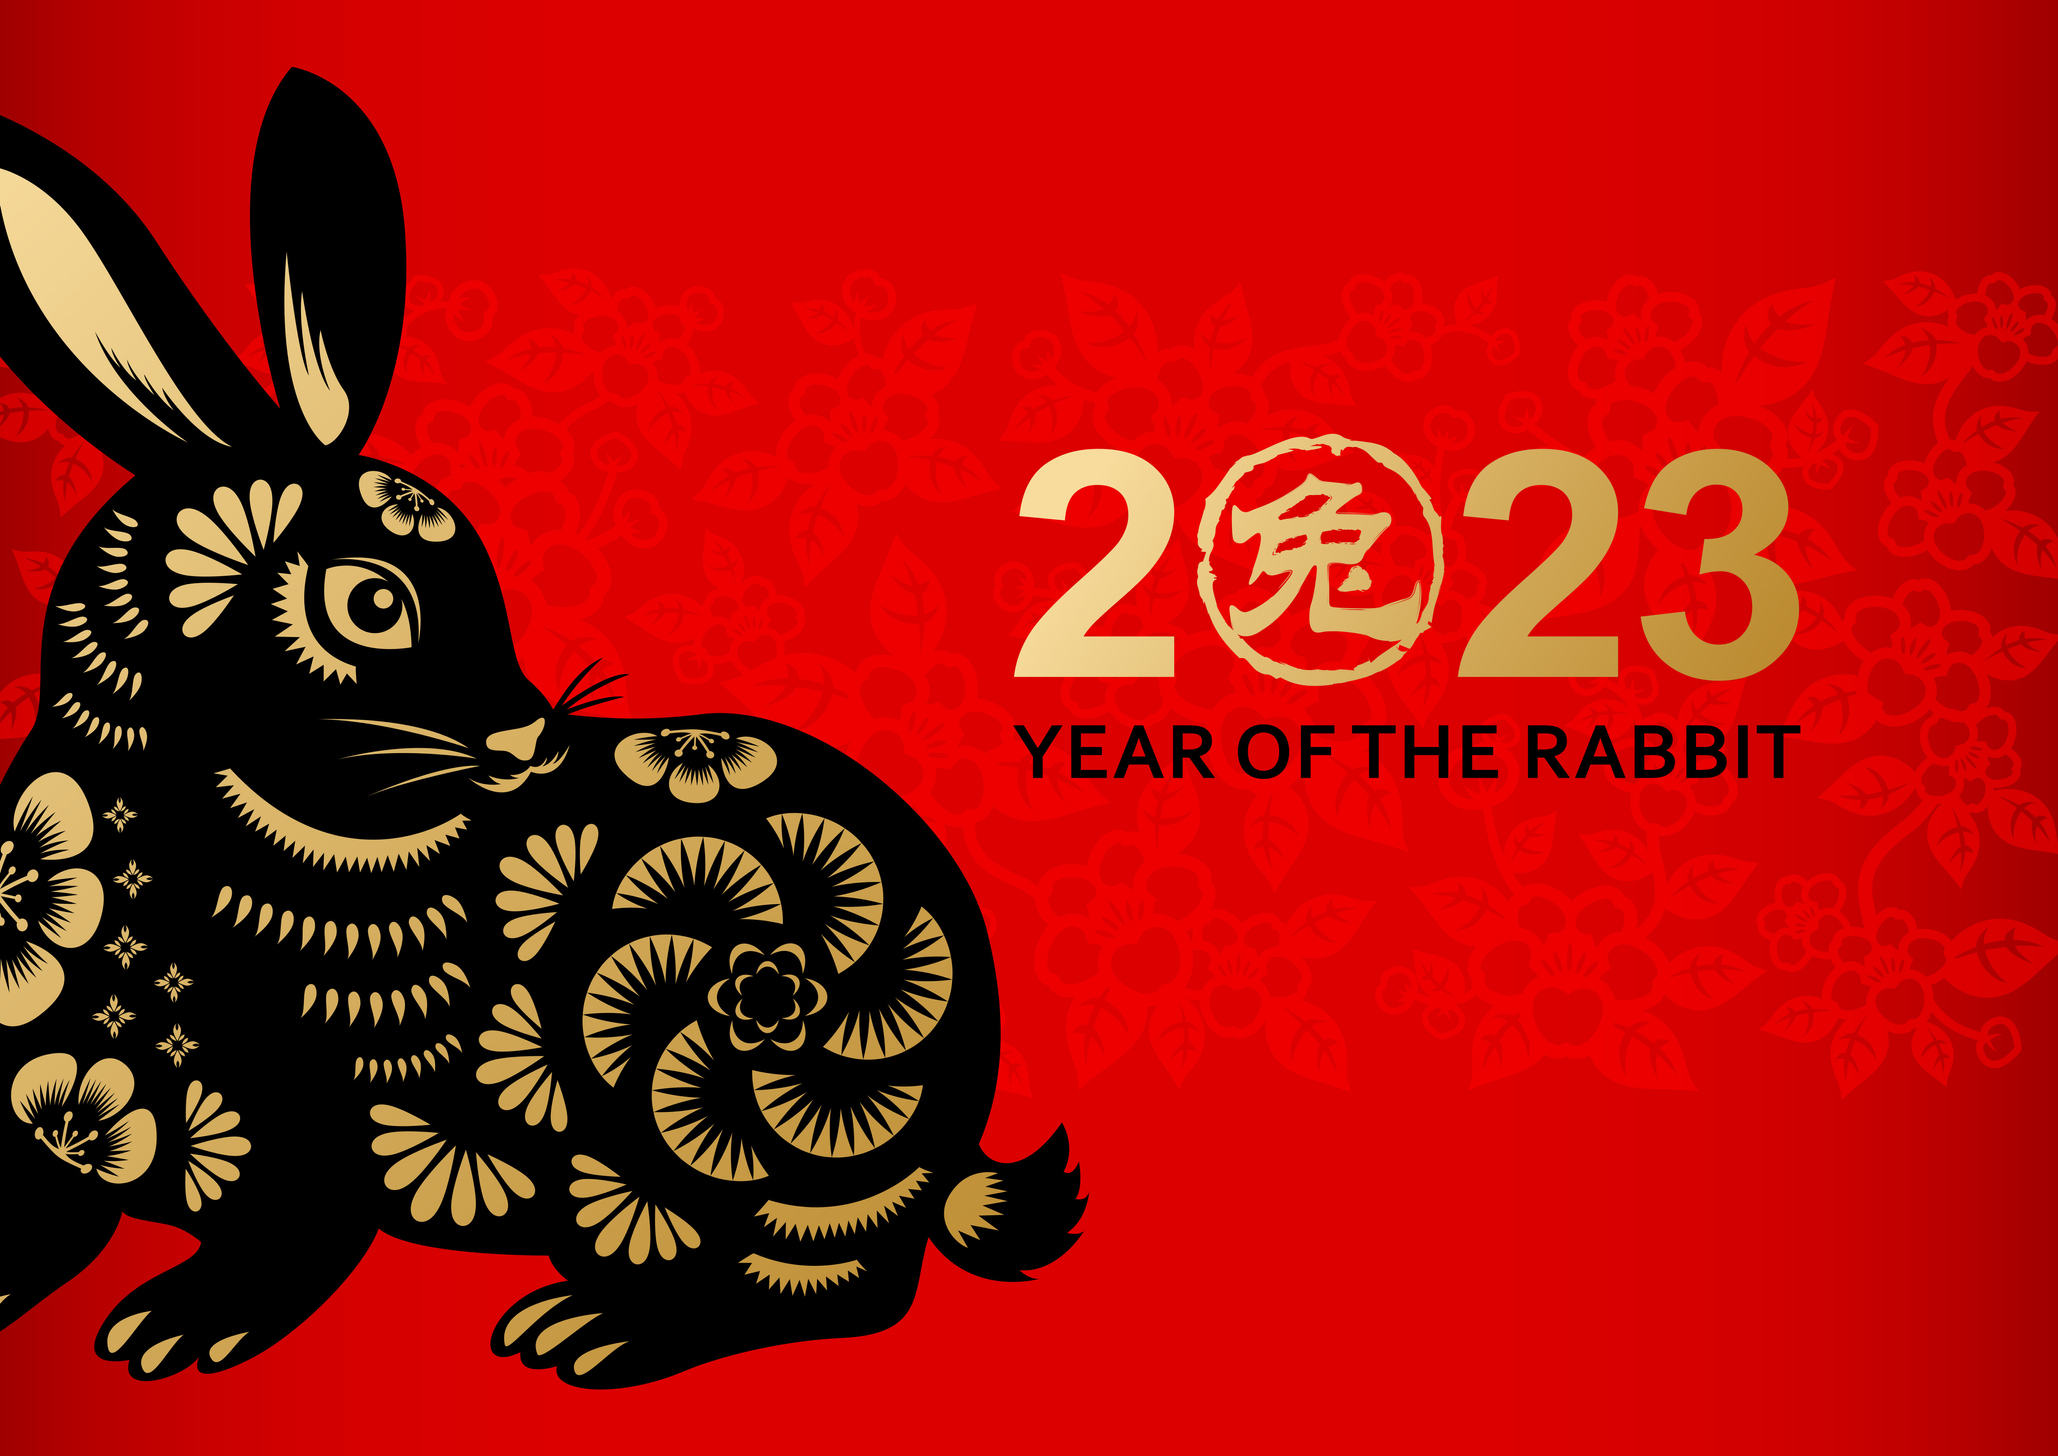 Year of the Rabbit: What 2023 has in store for you